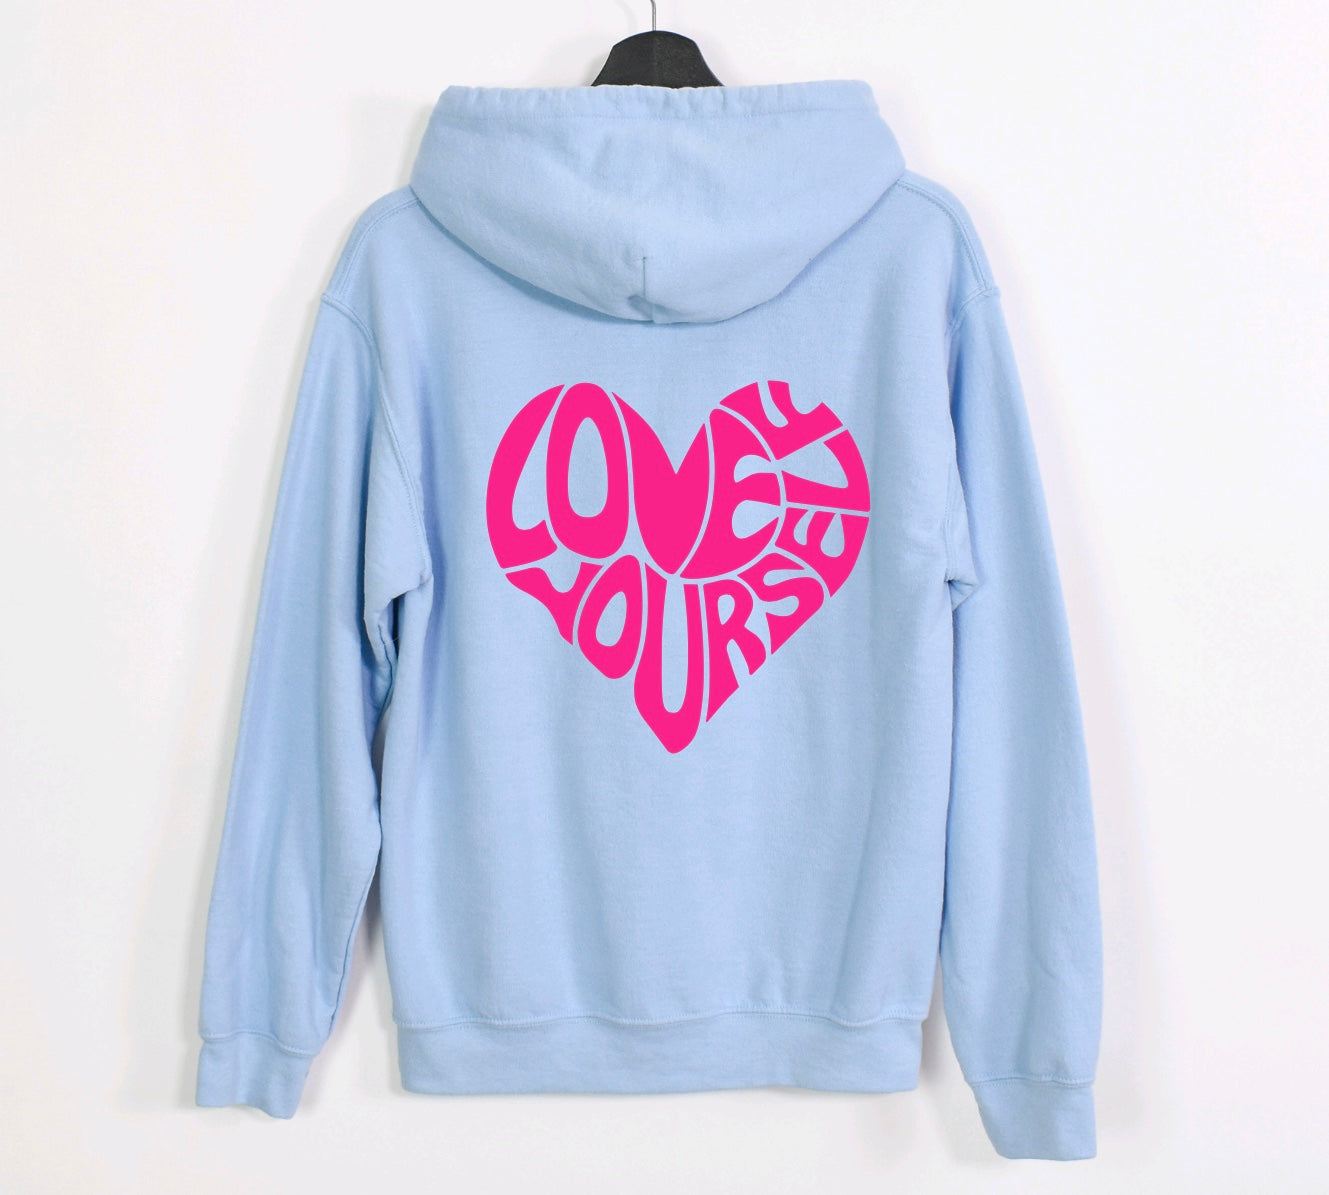 Love yourself unisex hoodie with sleeve design in paste with pink graphic 